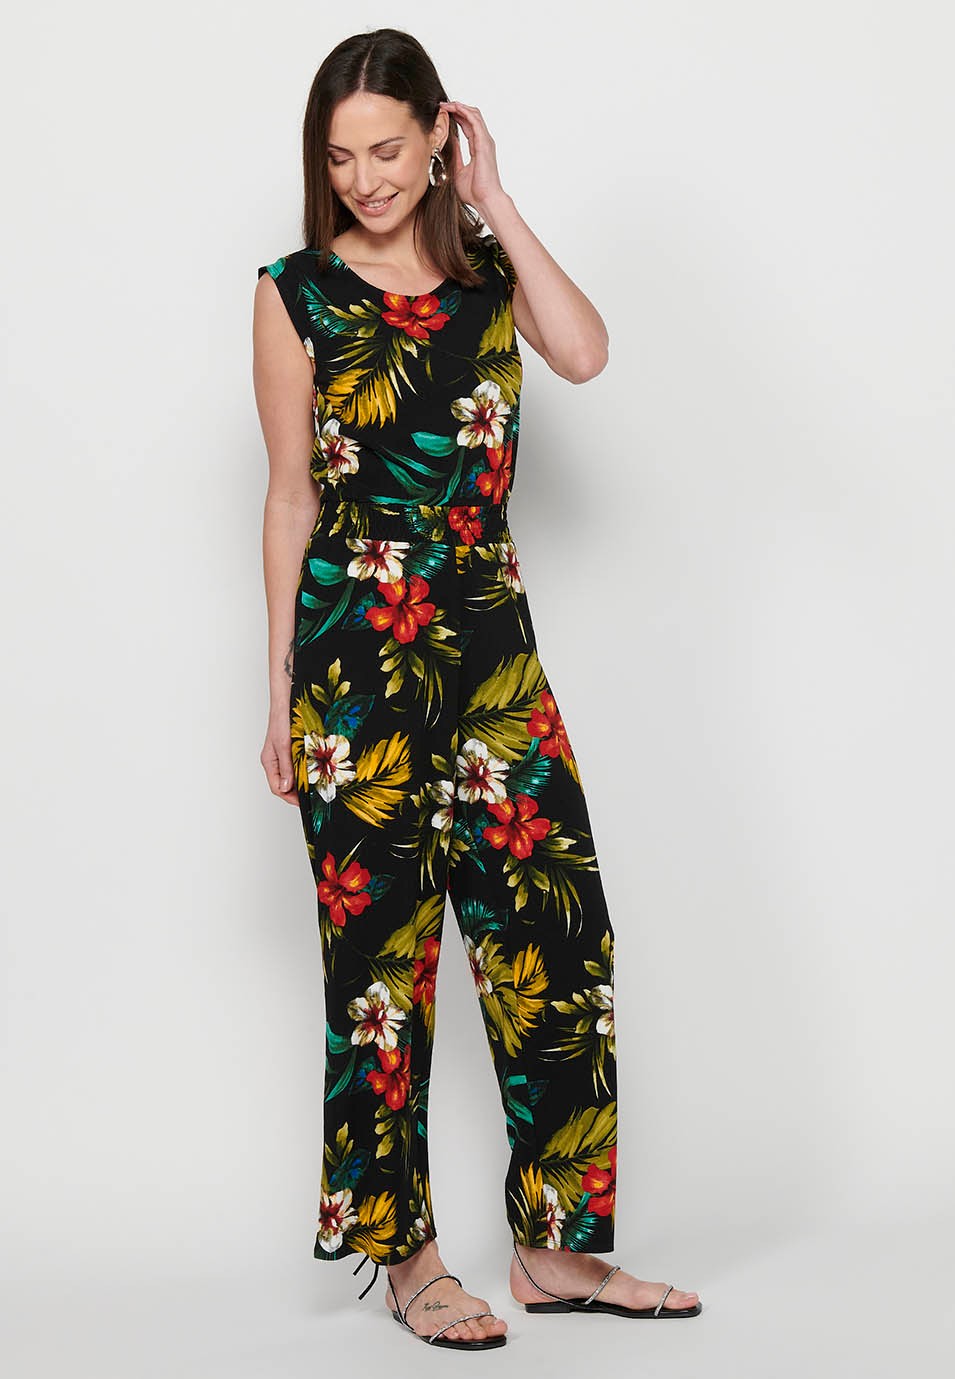 Jumpsuit dress with zipper back closure and tropical floral print, round neck and tight waist with elastic band in Multicolor for Women